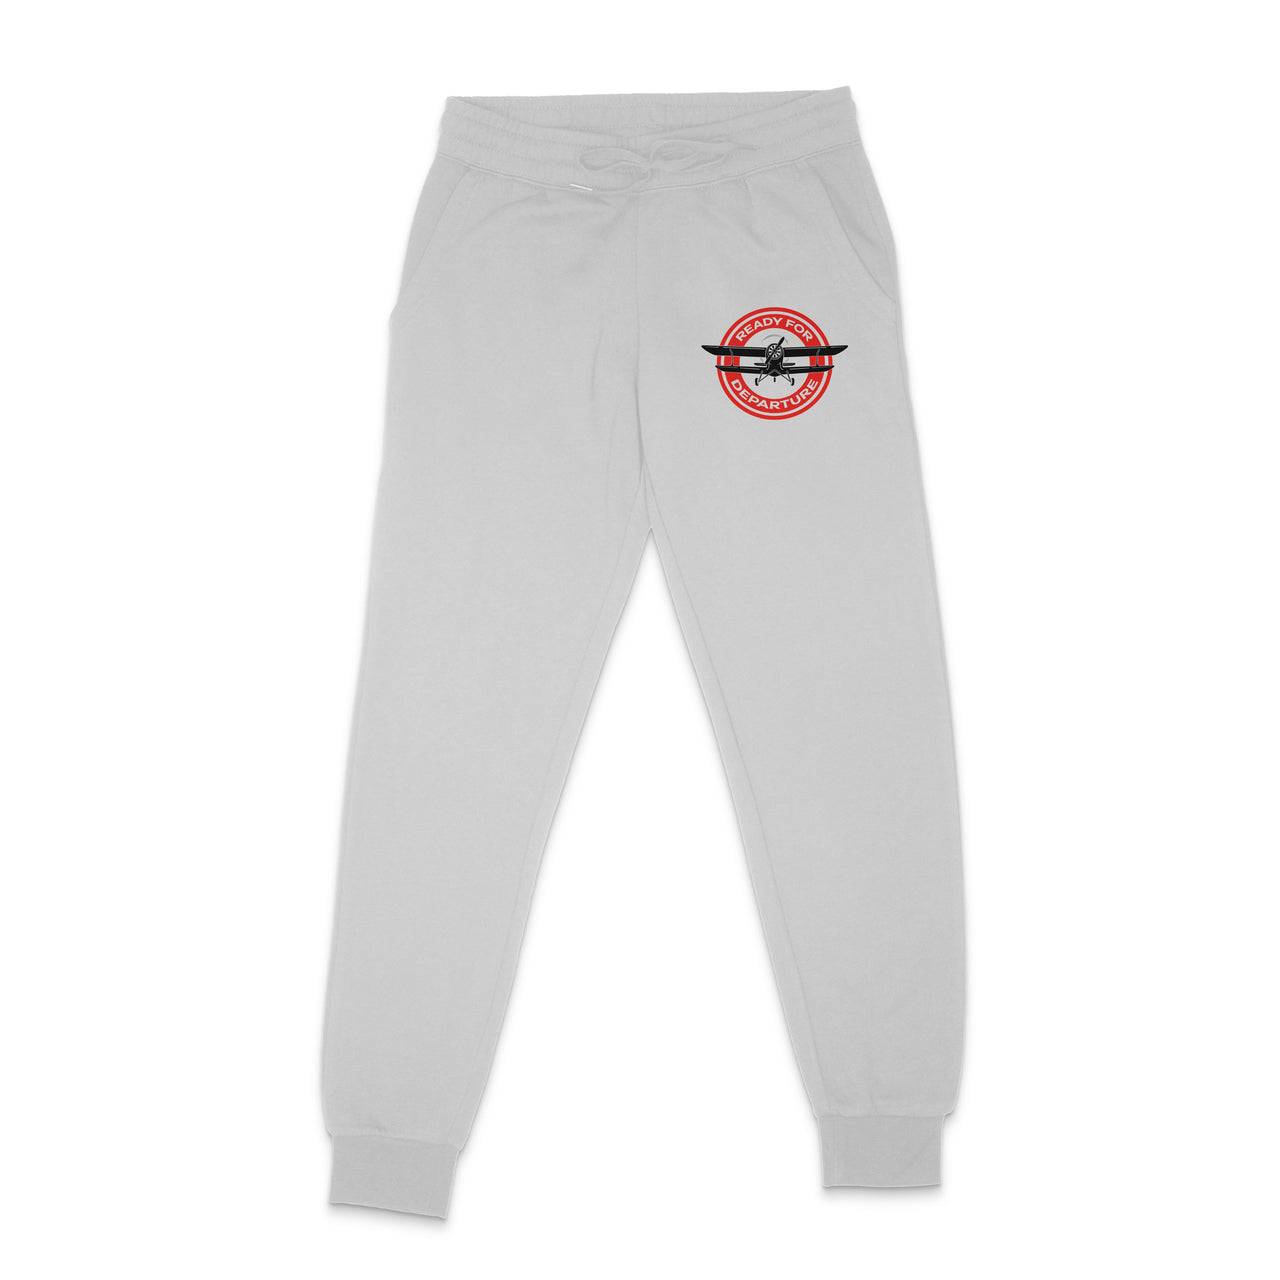 Ready for Departure Designed Sweatpants